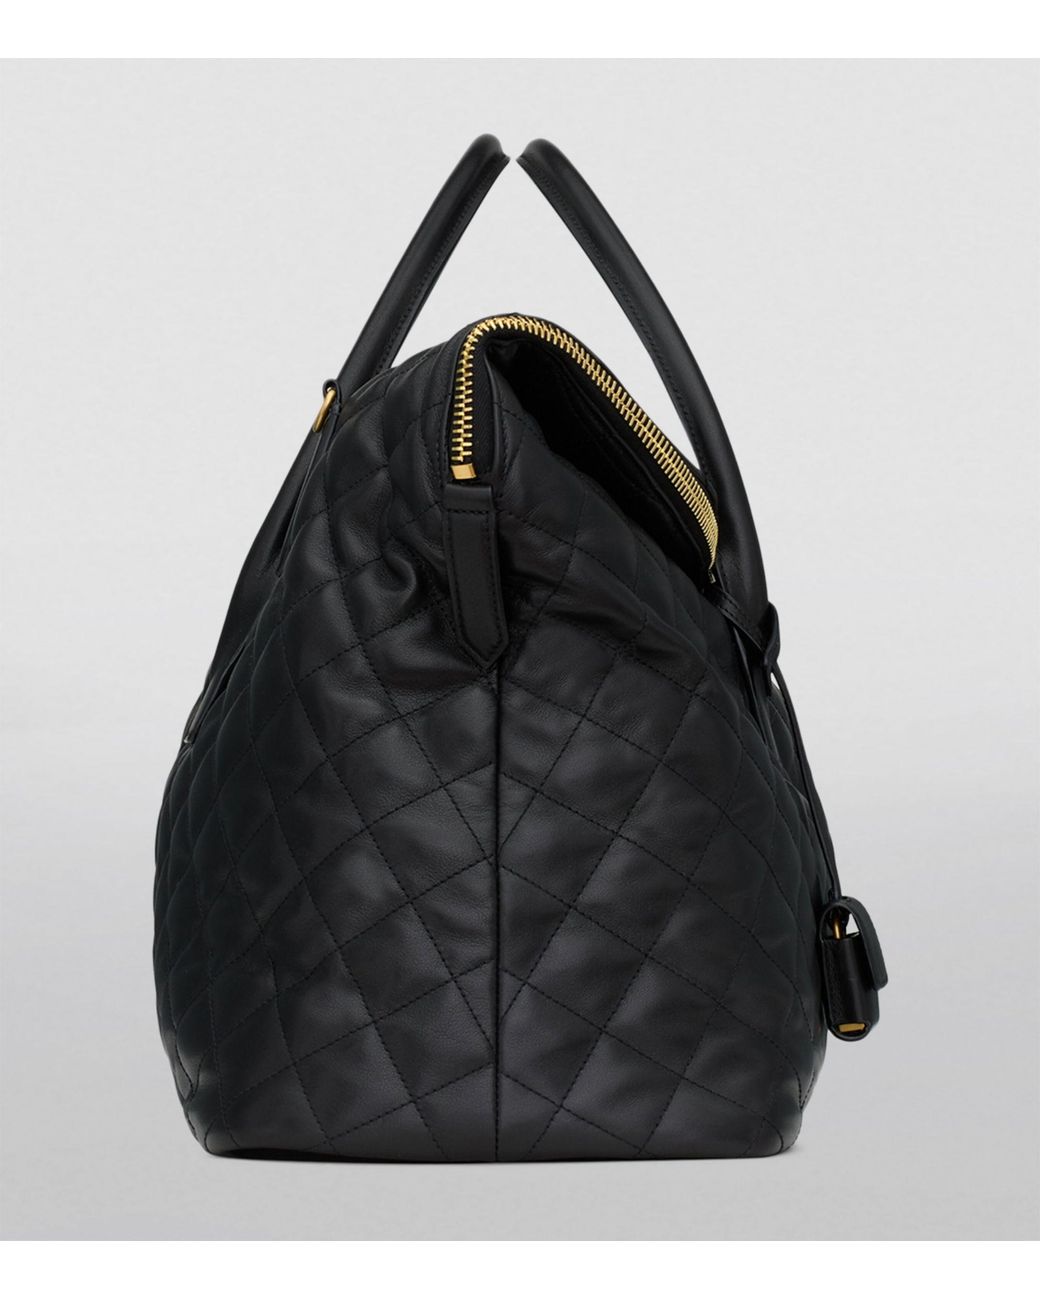 ES Giant embroidered quilted leather weekend bag